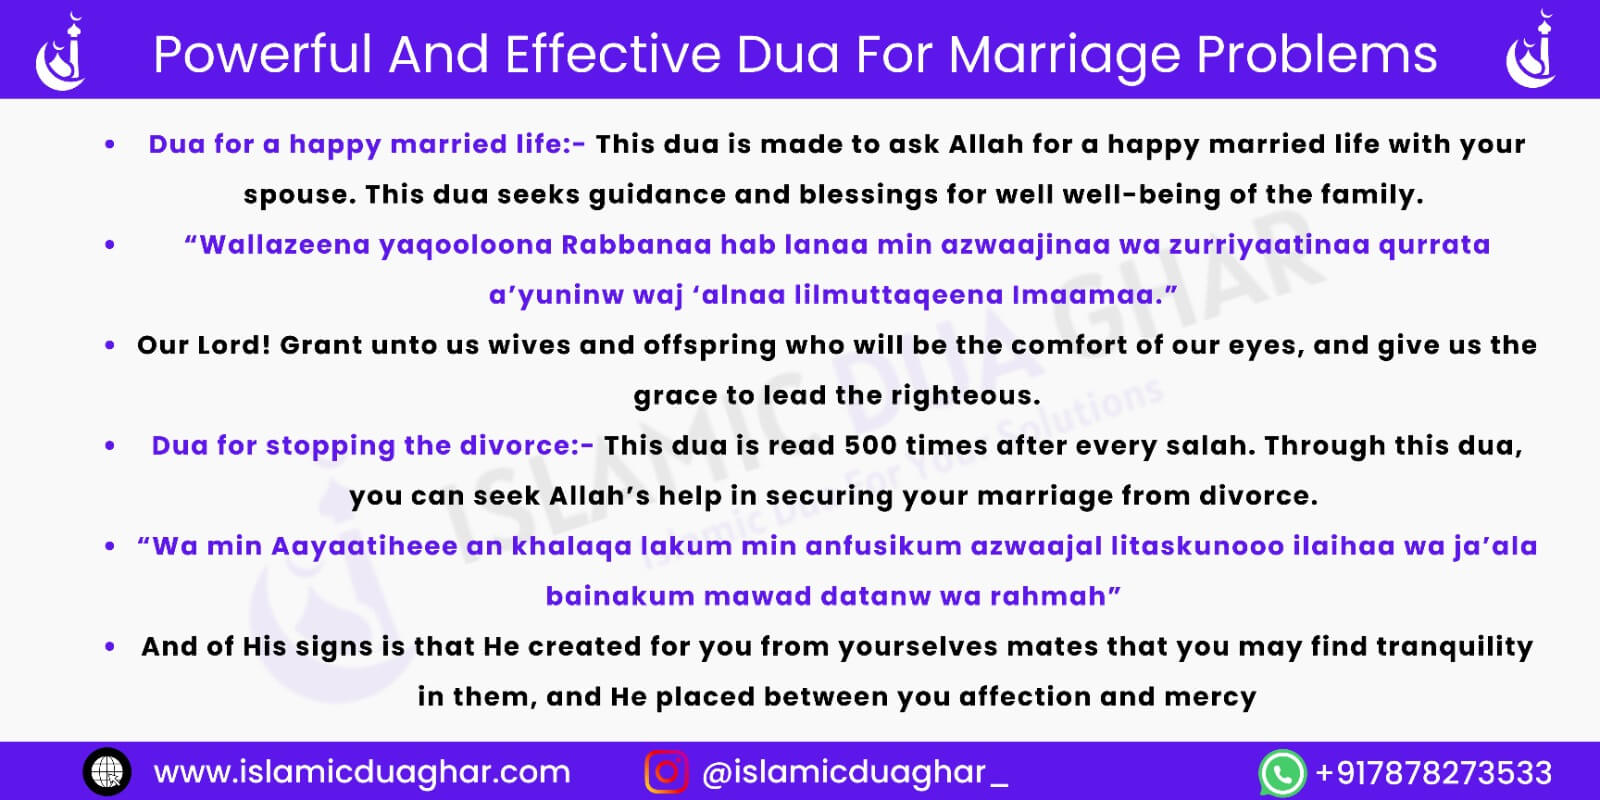 Powerful And Effective Dua For Marriage Problems